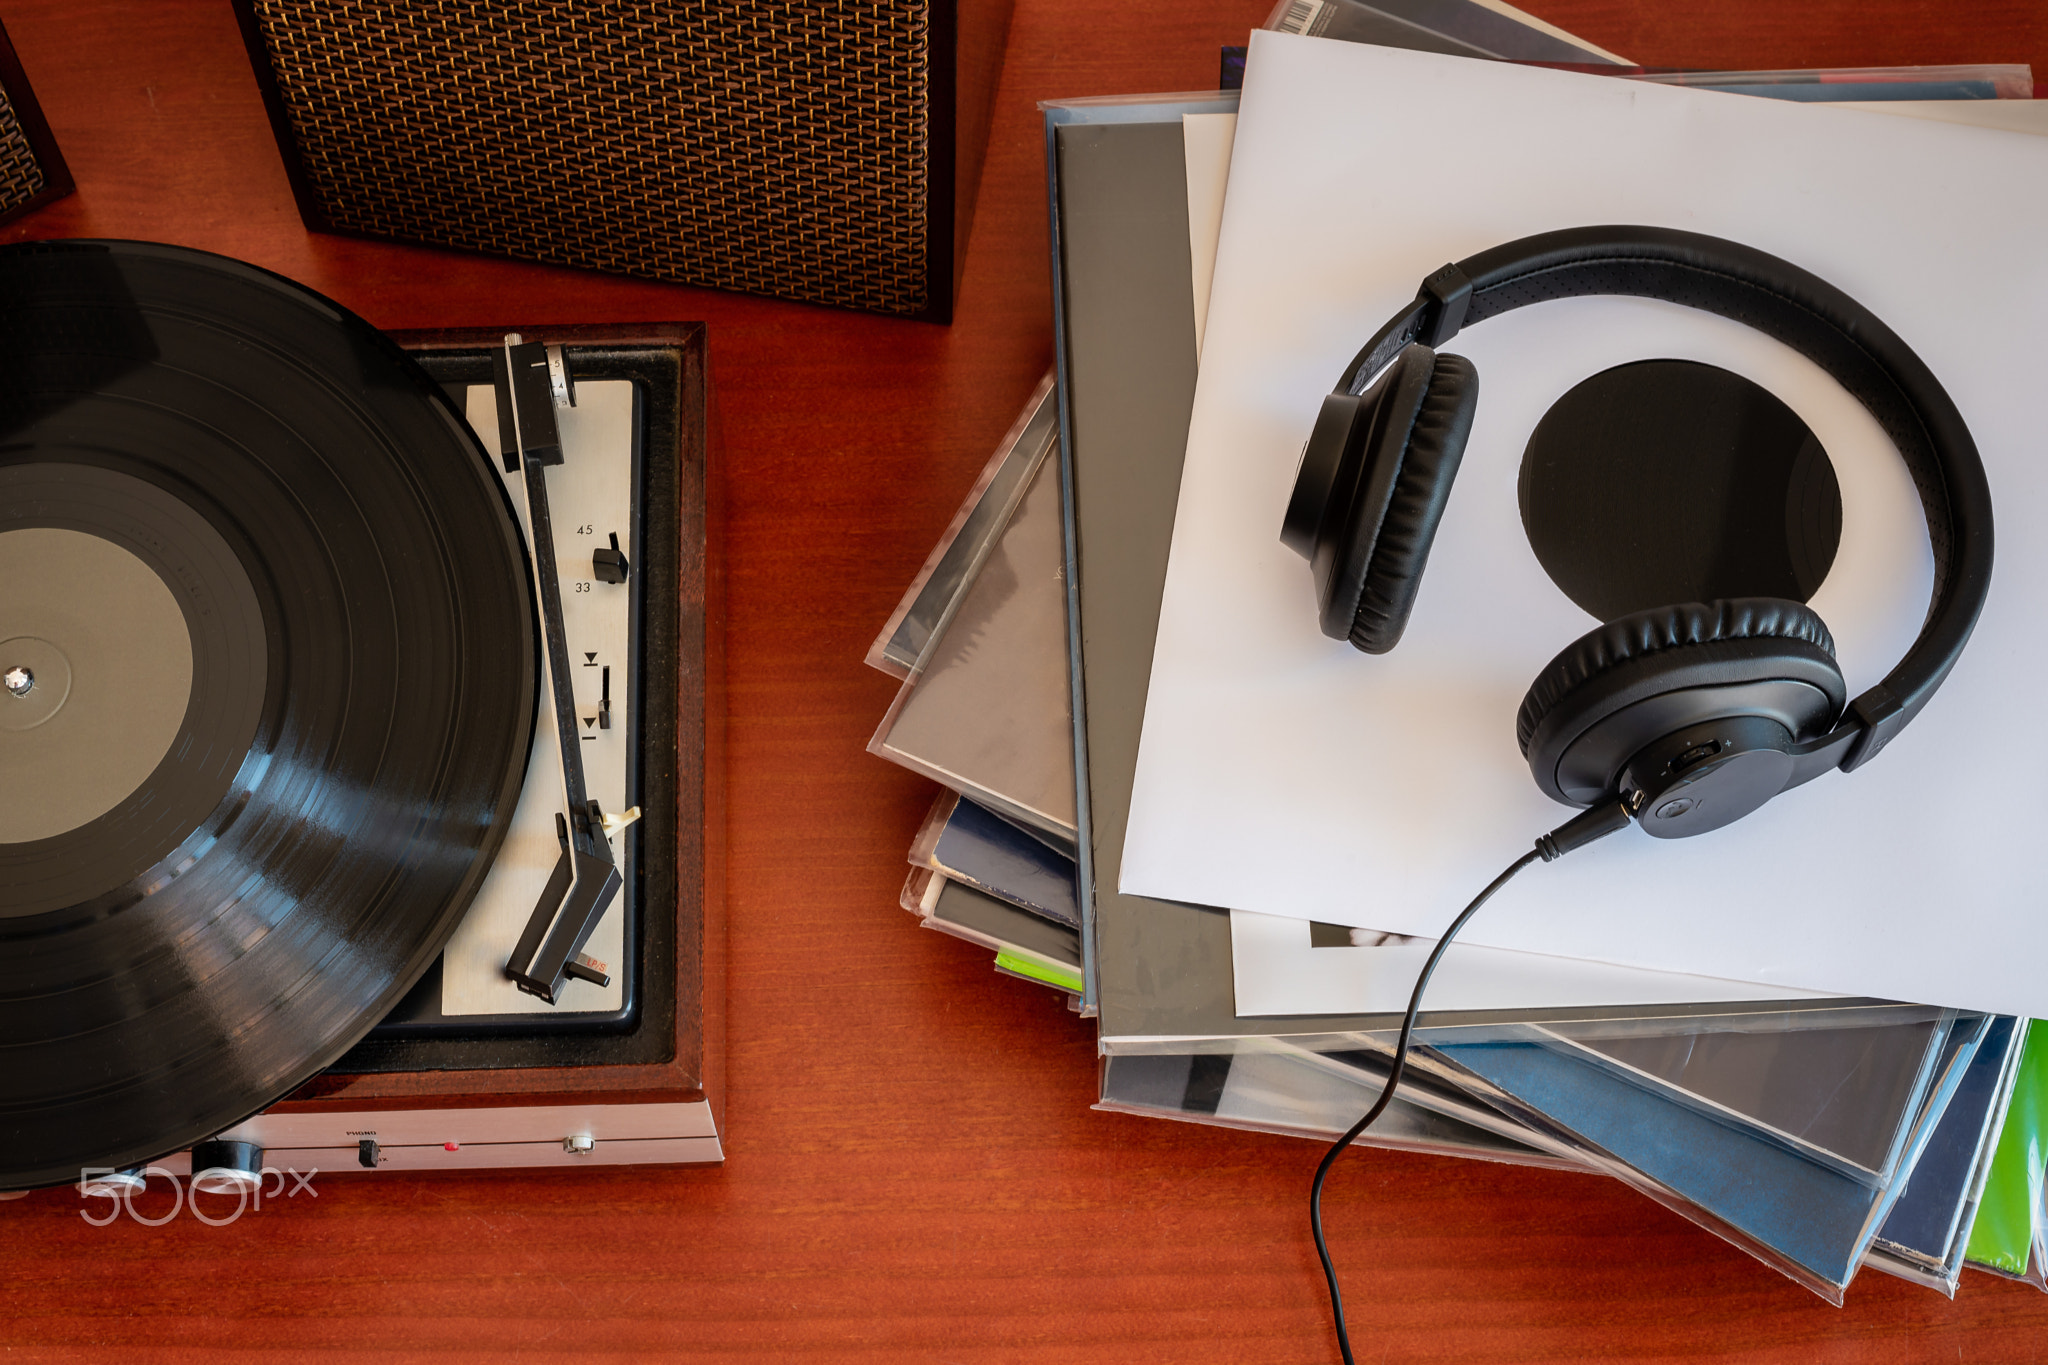 Vintage turntable with vinyls and headphones on a table